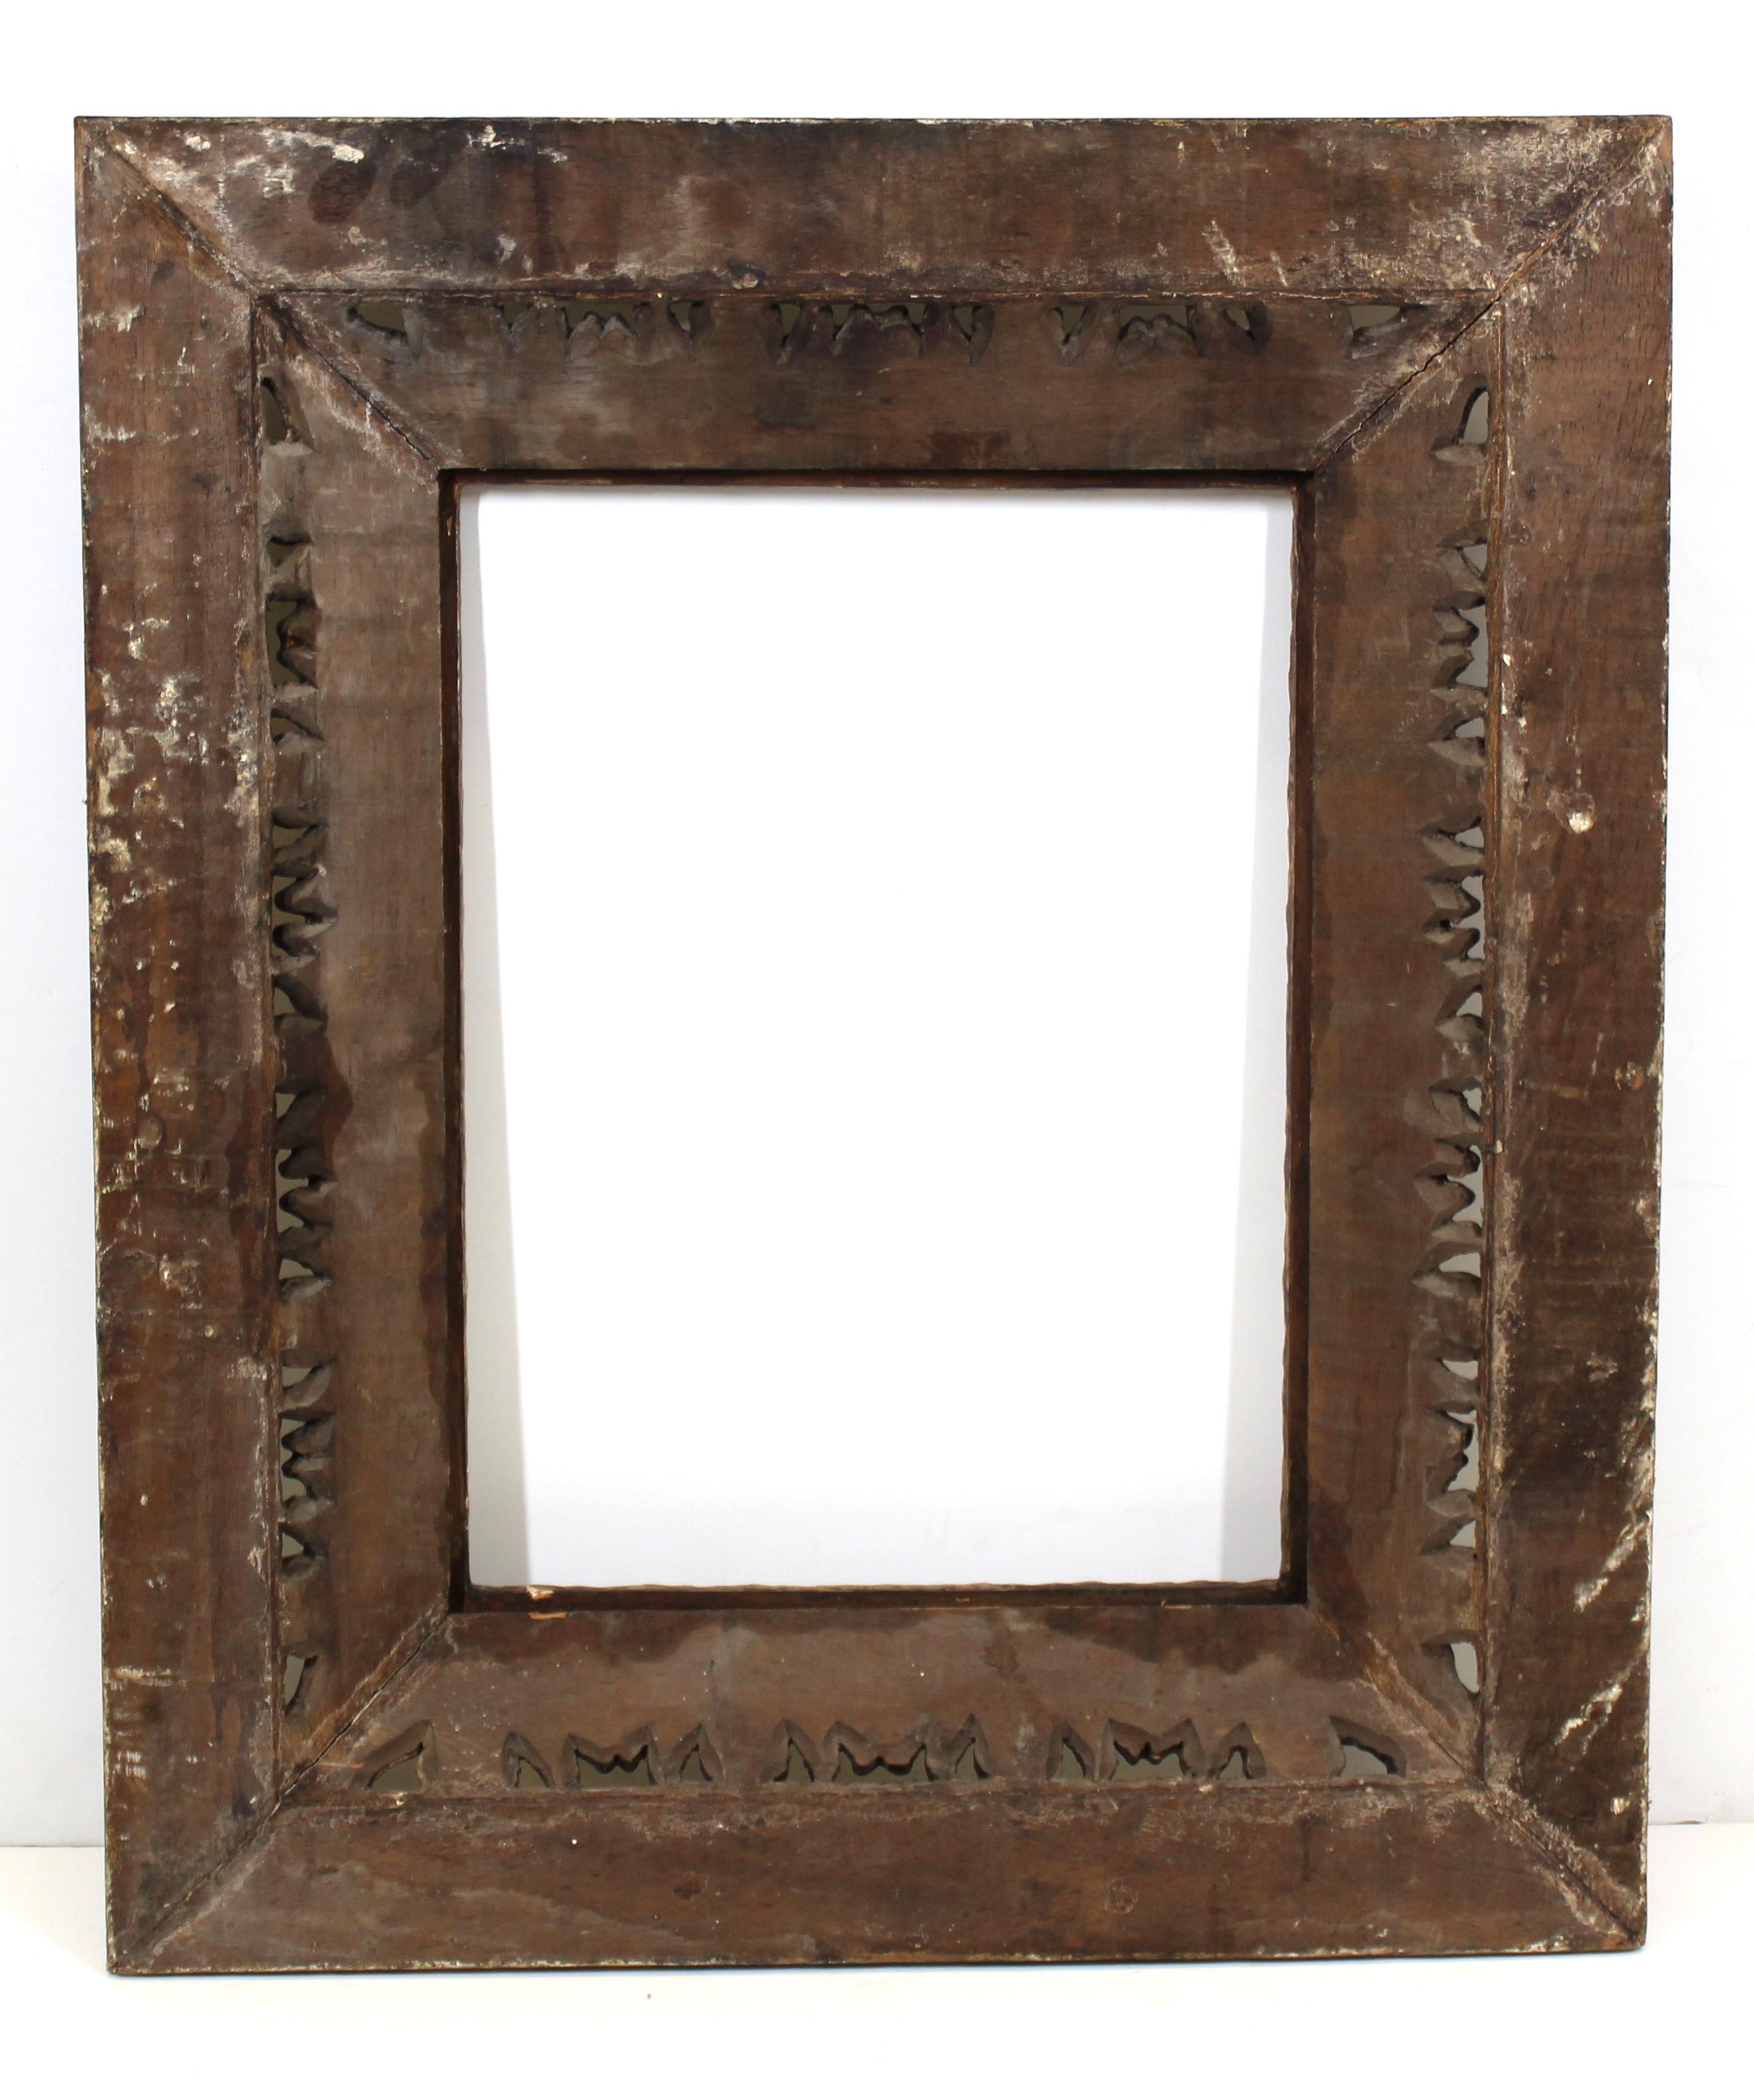 Spanish Baroque Revival Giltwood Carved Frame In Good Condition For Sale In New York, NY